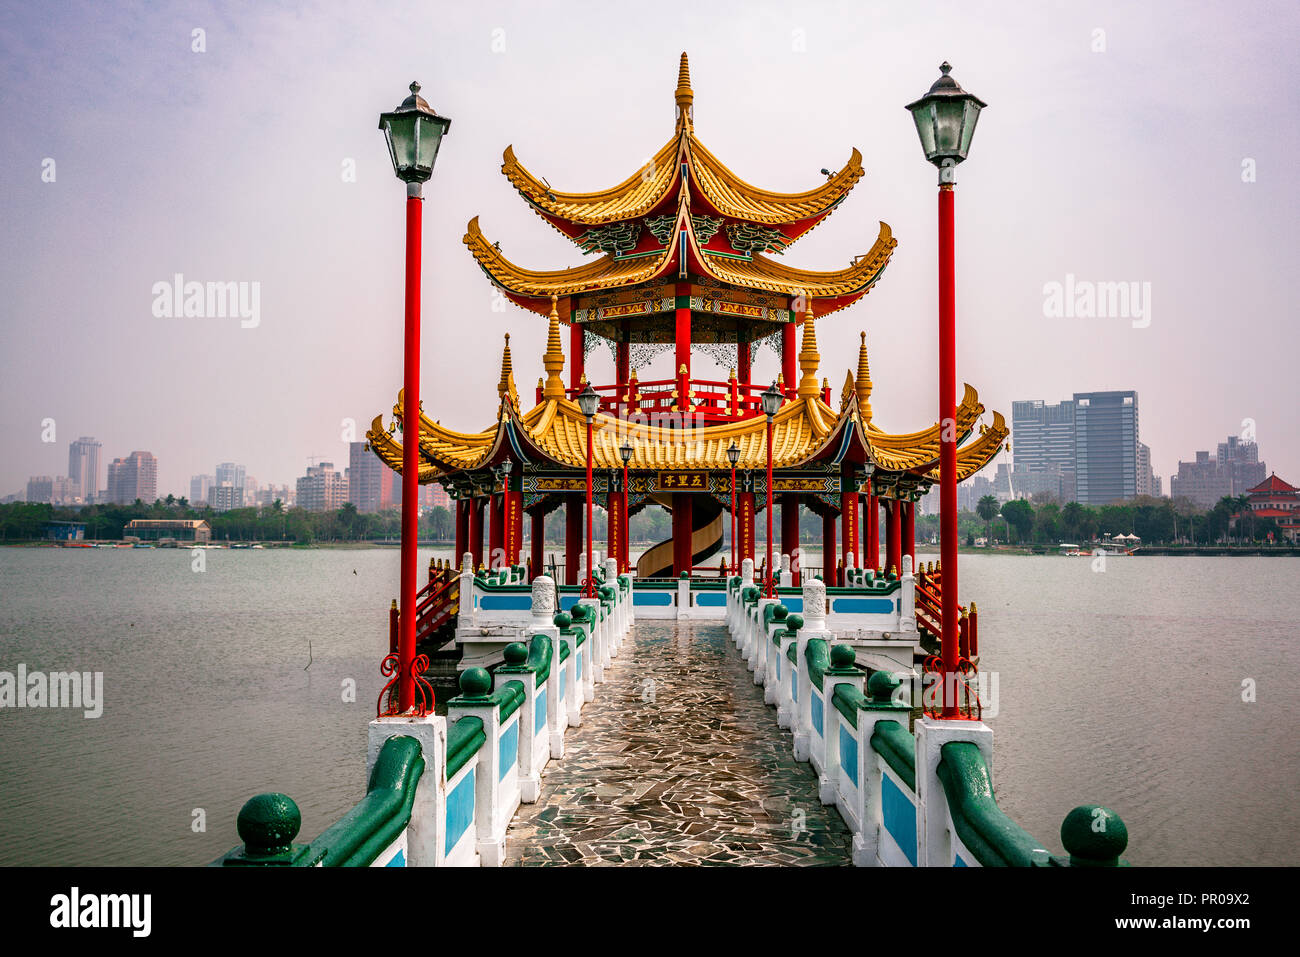 Close-up view of Spring and autumn pavilions at lotus pond lake in Kaohsiung Taiwan HDR Stock Photo